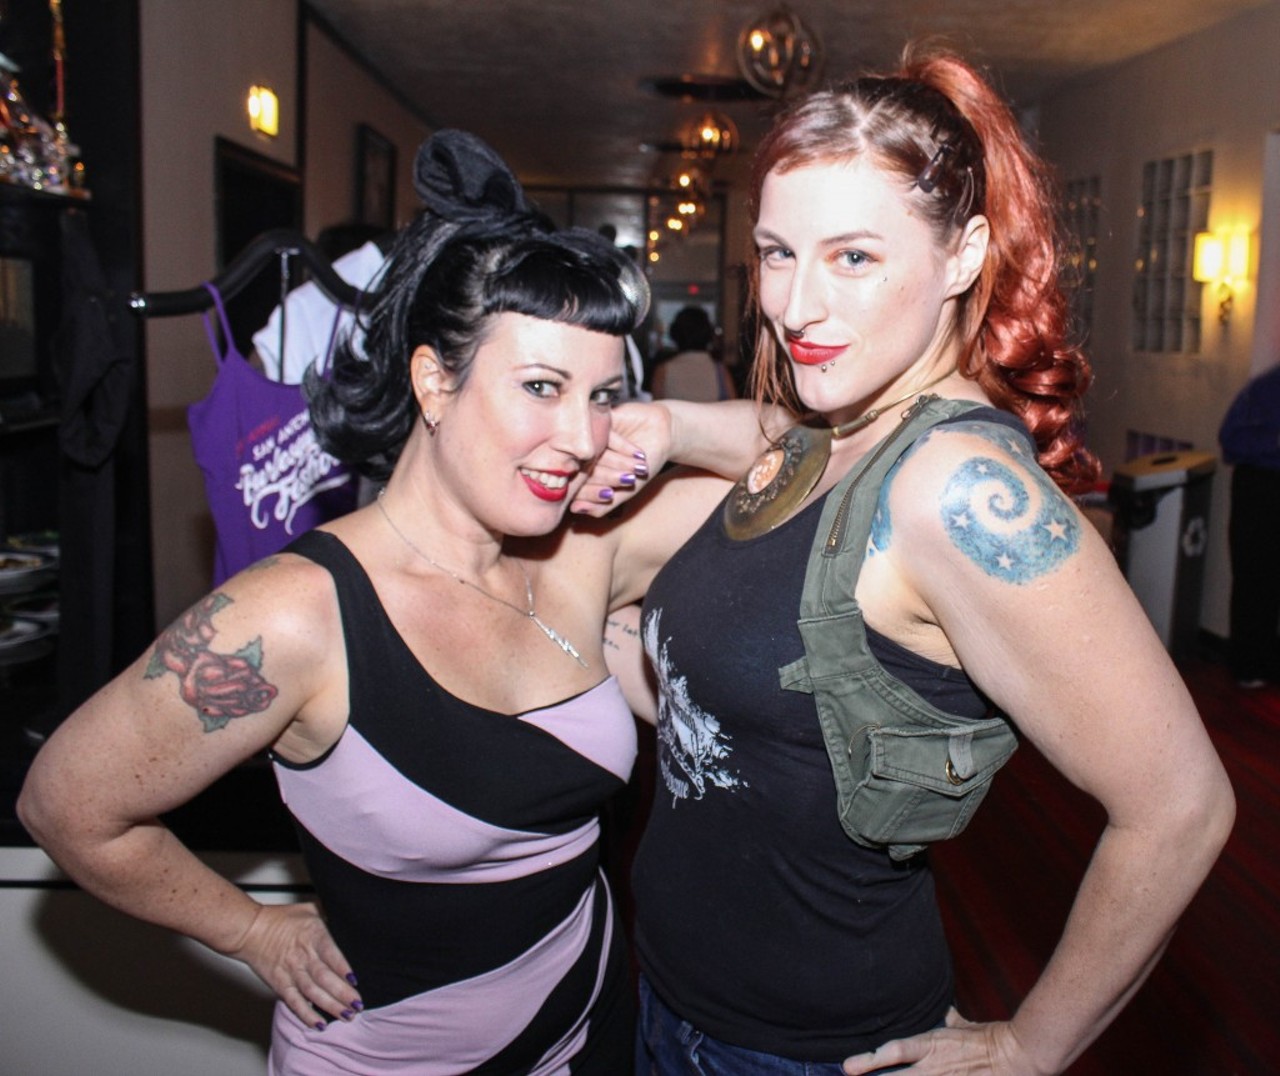 50 Dazzling Moments from the San Antonio Burlesque Festival (NSFW!)